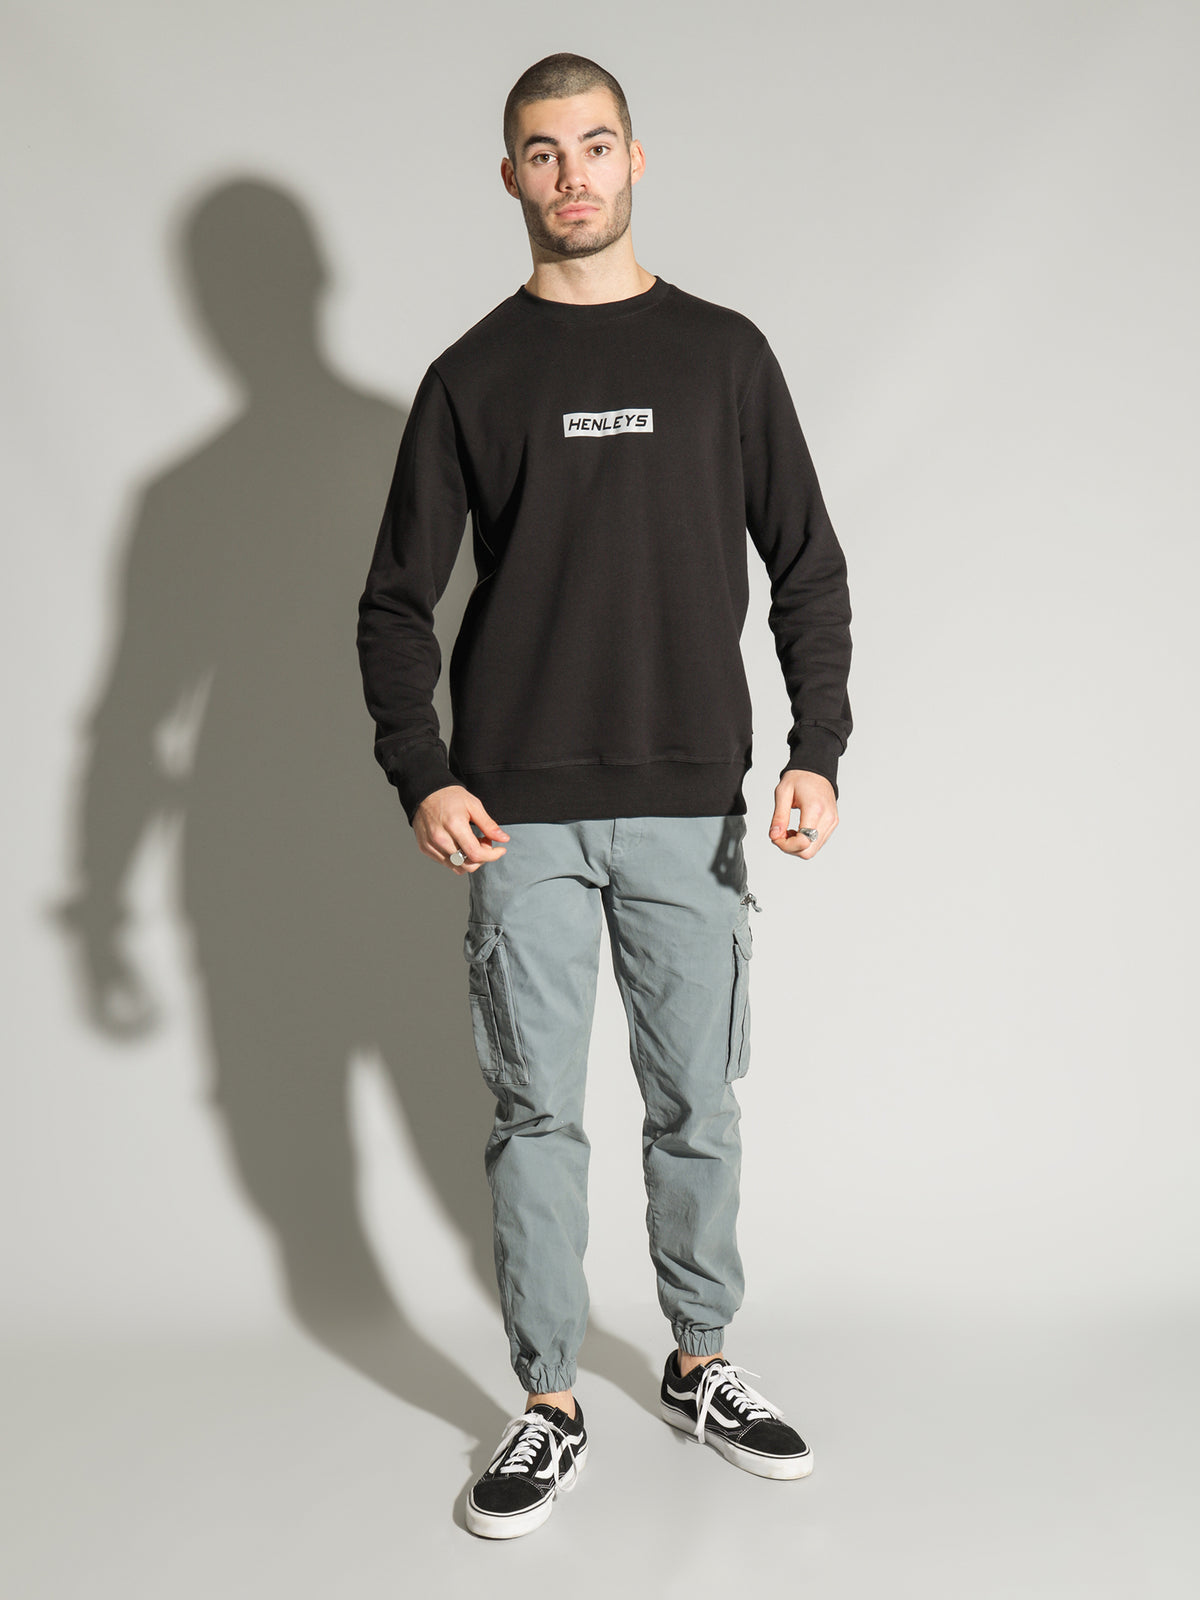 League Reflective Crew Sweater in Black